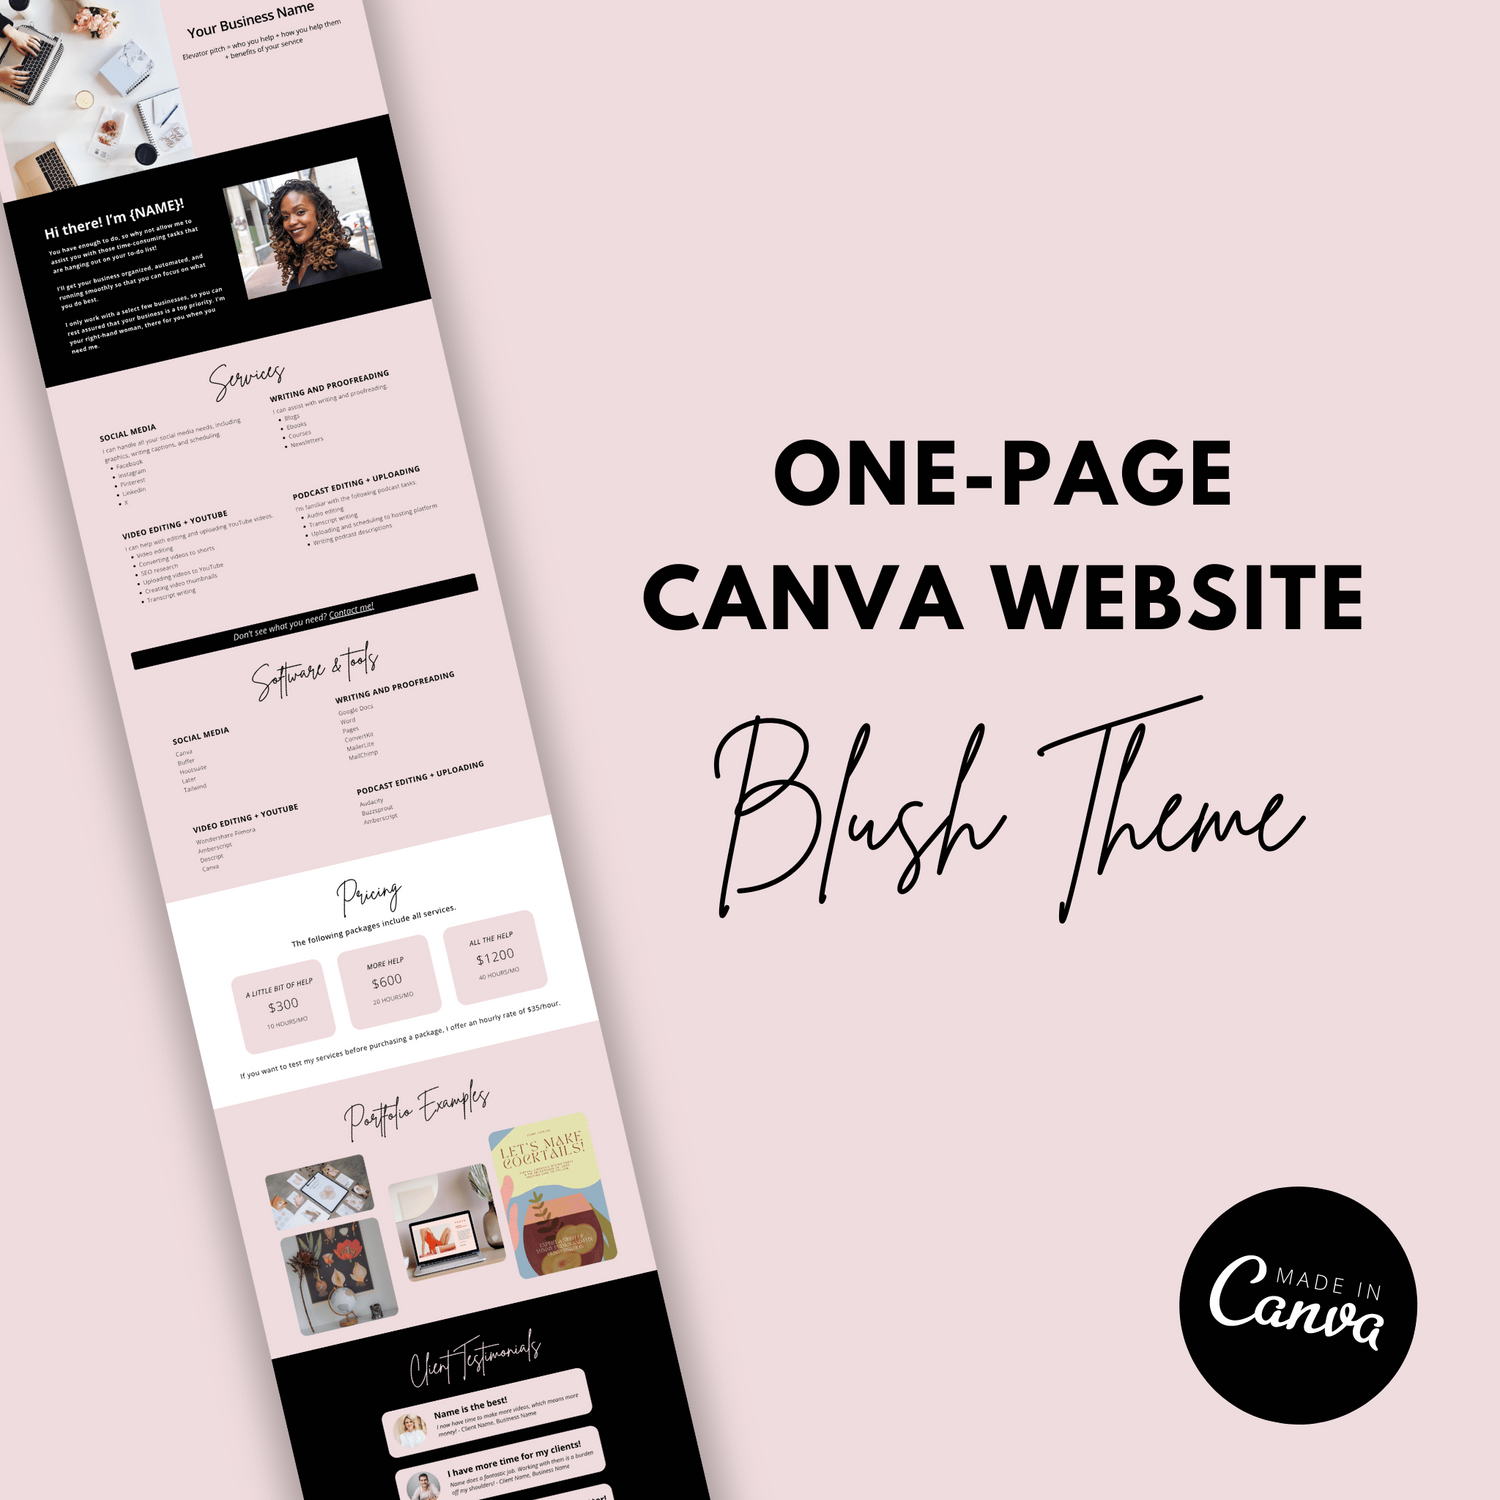 One-page Canva Website for Virtual Assistants Blush